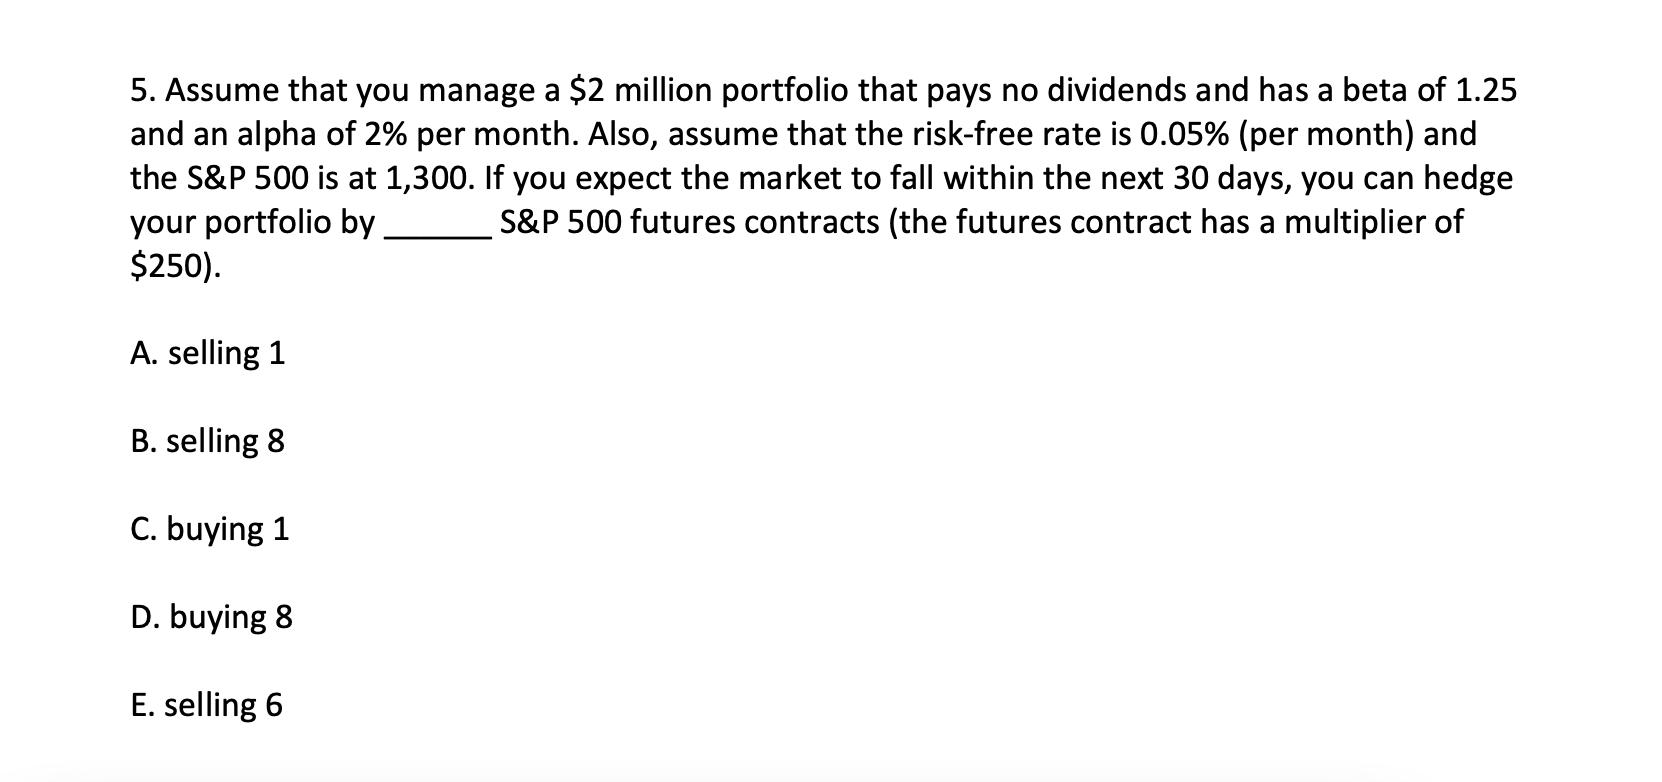 5. Assume that you manage a $2 million portfolio that pays no dividends and has a beta of 1.25 and an alpha of 2% per month.